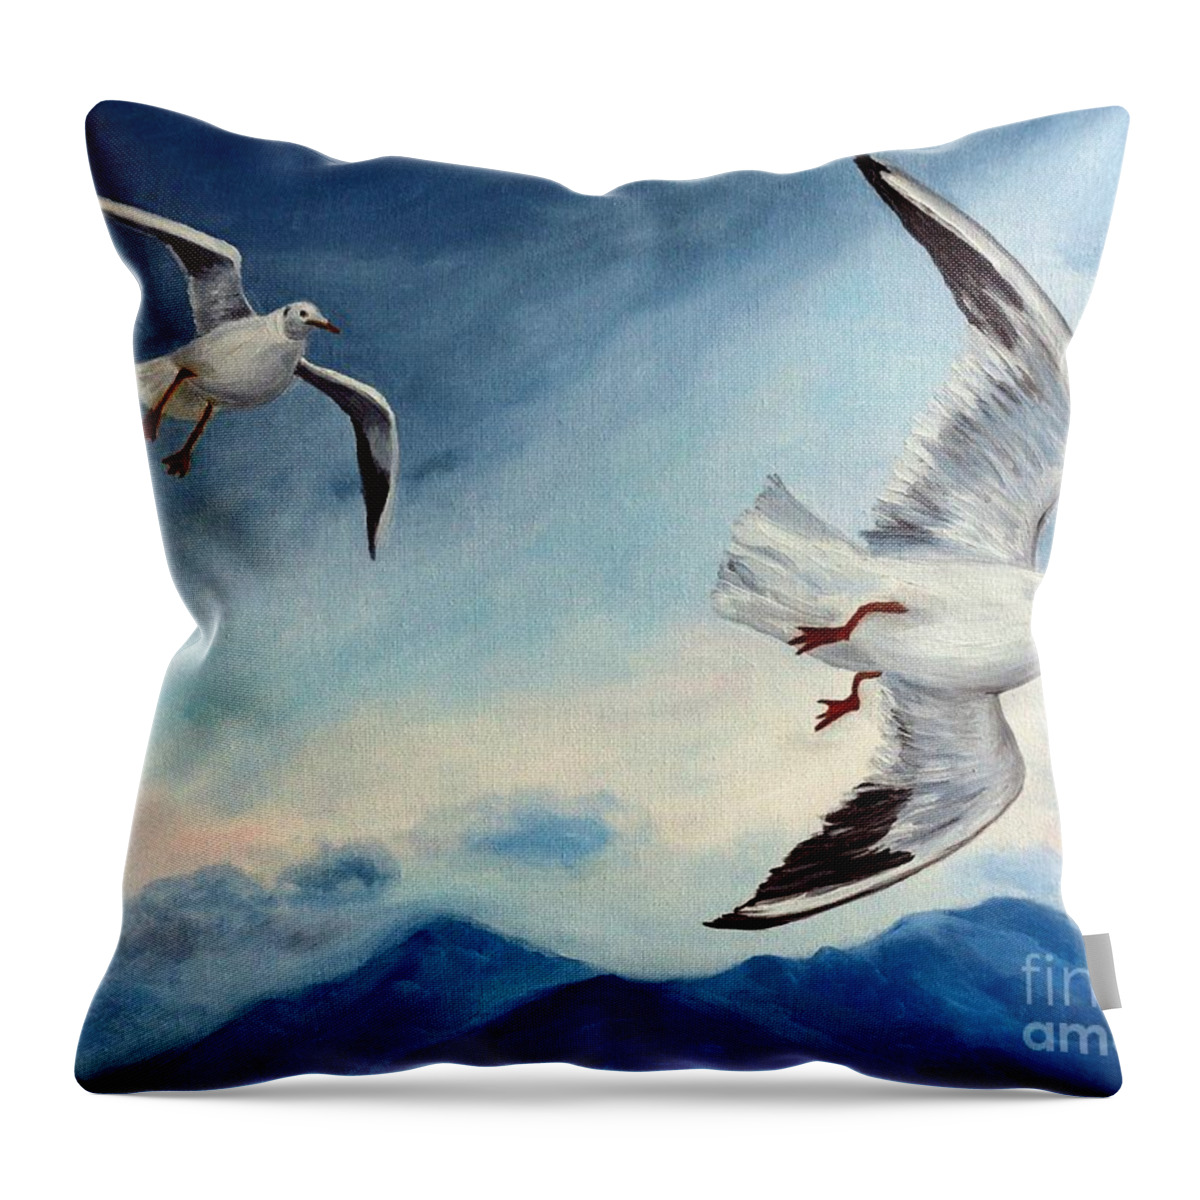 Seagulls Throw Pillow featuring the painting In Flight by Julie Brugh Riffey